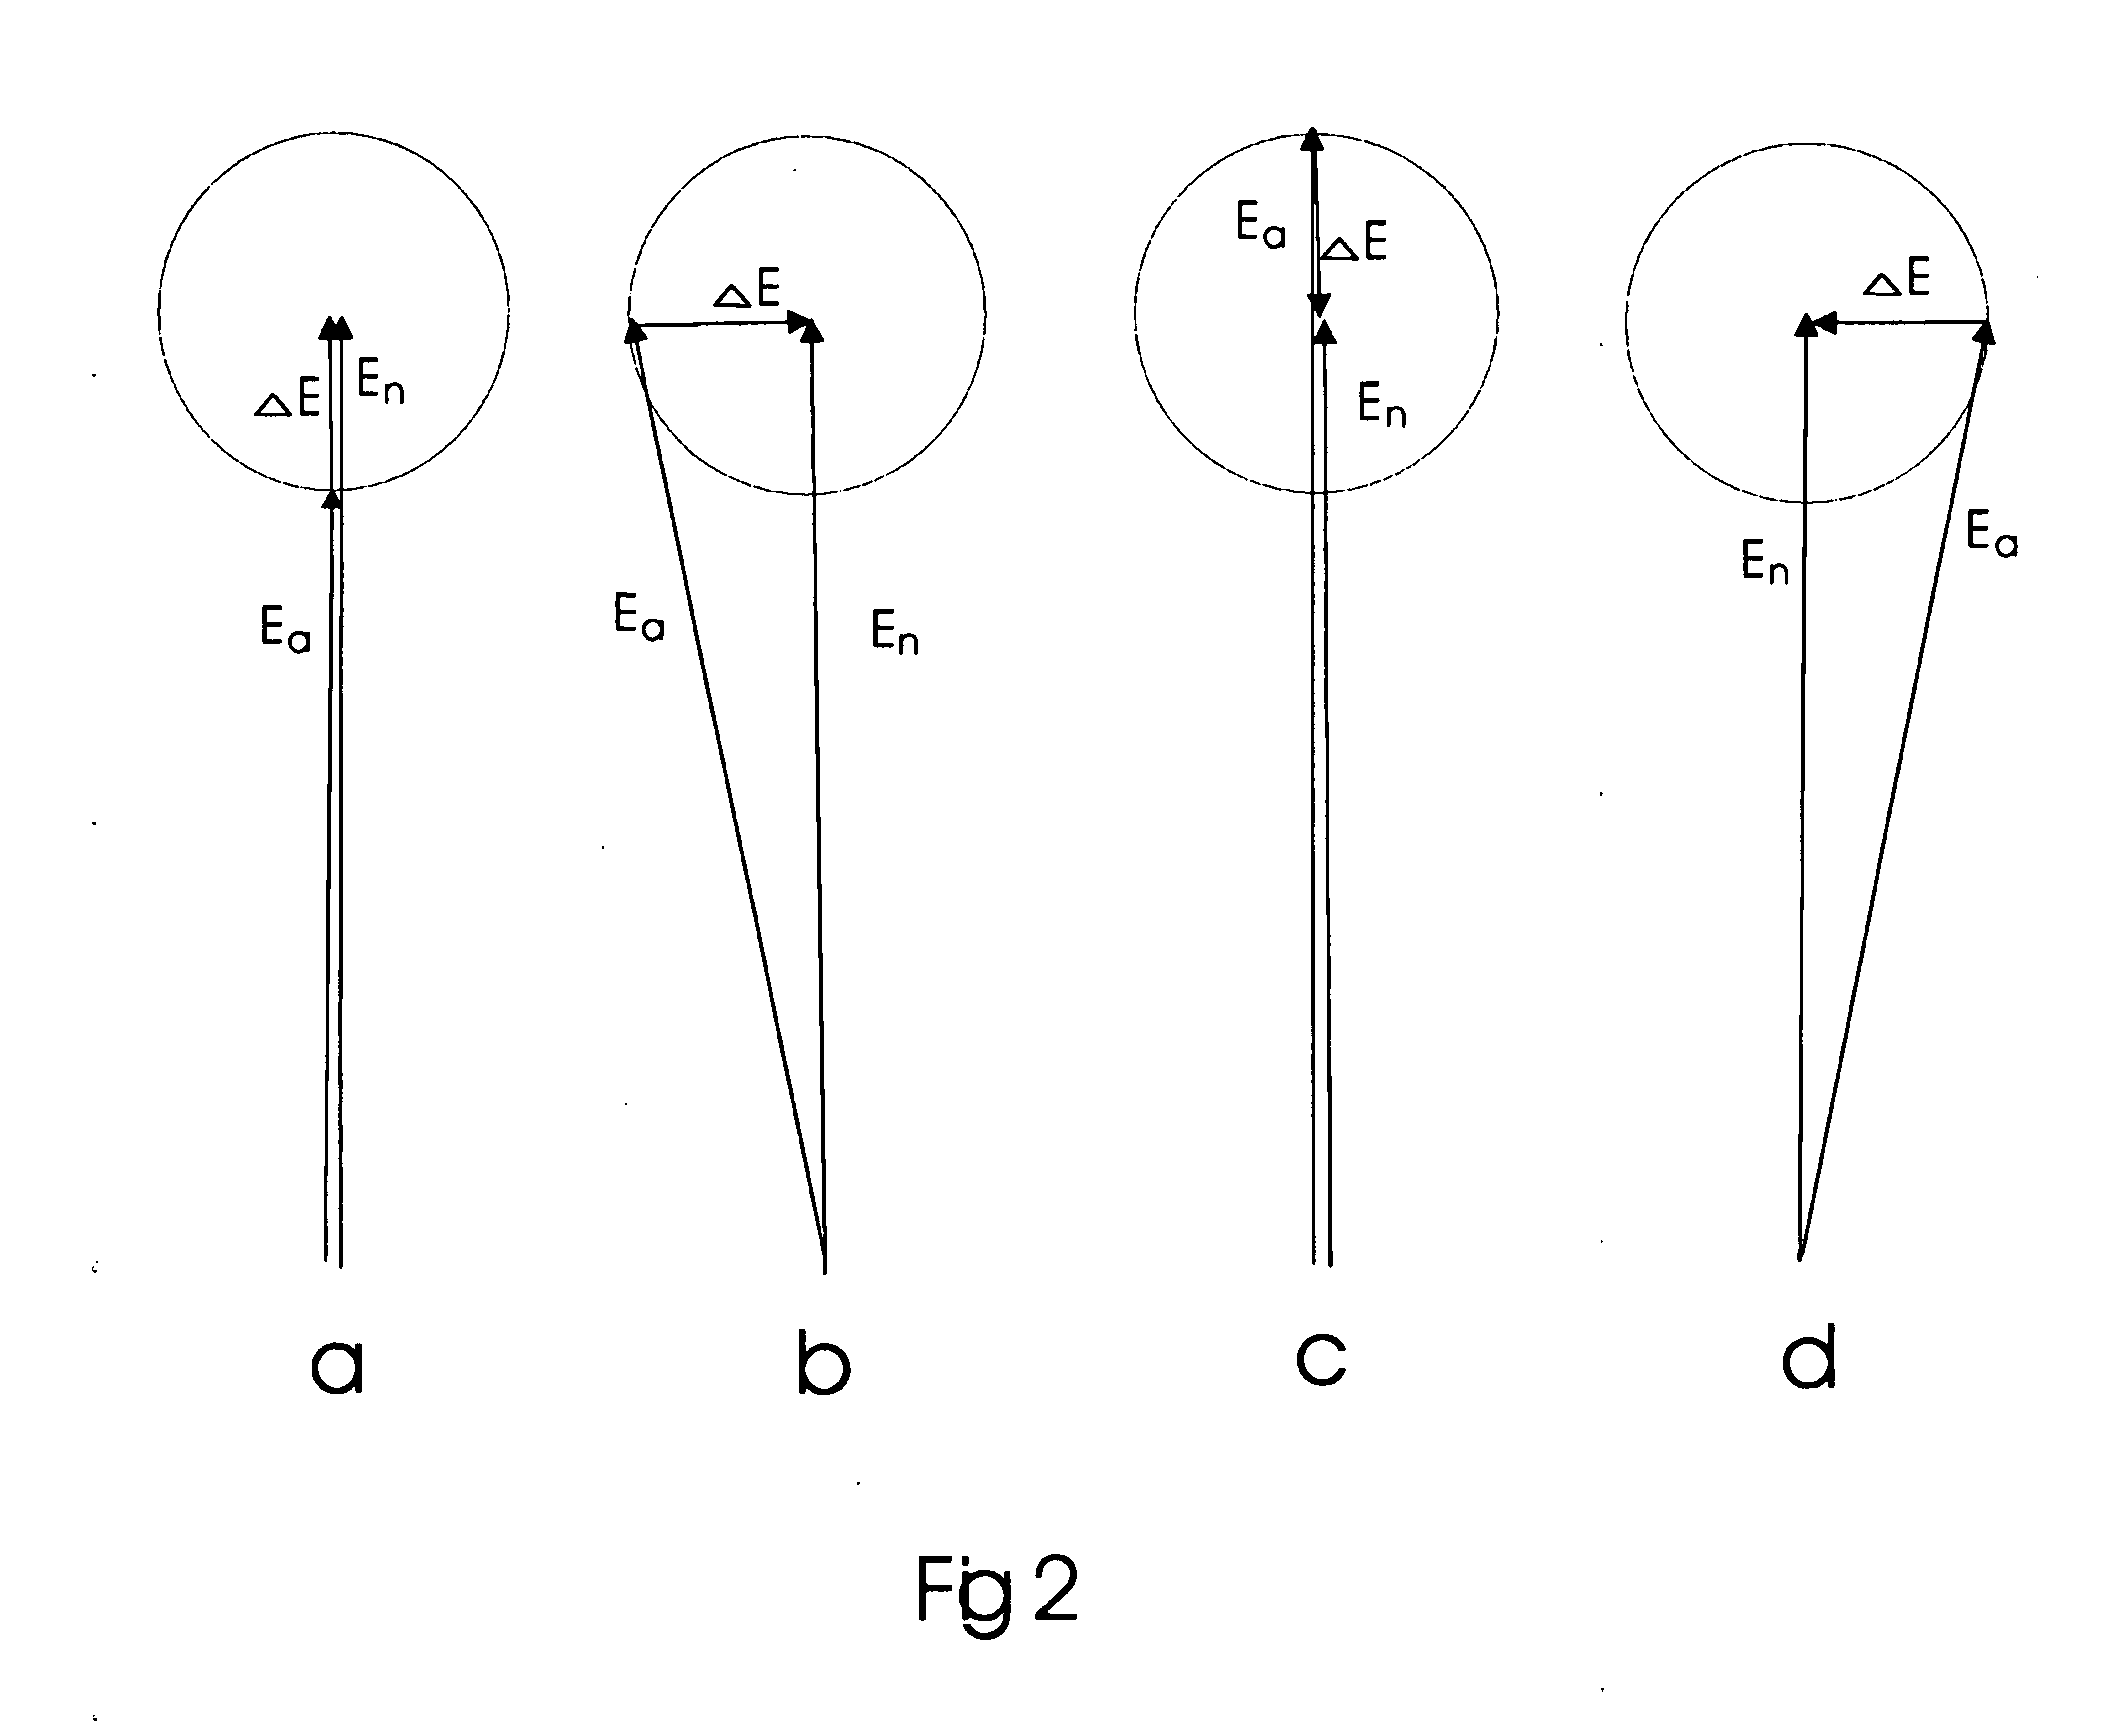 Induction regulator for power flow control in an ac transmission network and a method of controlling such network